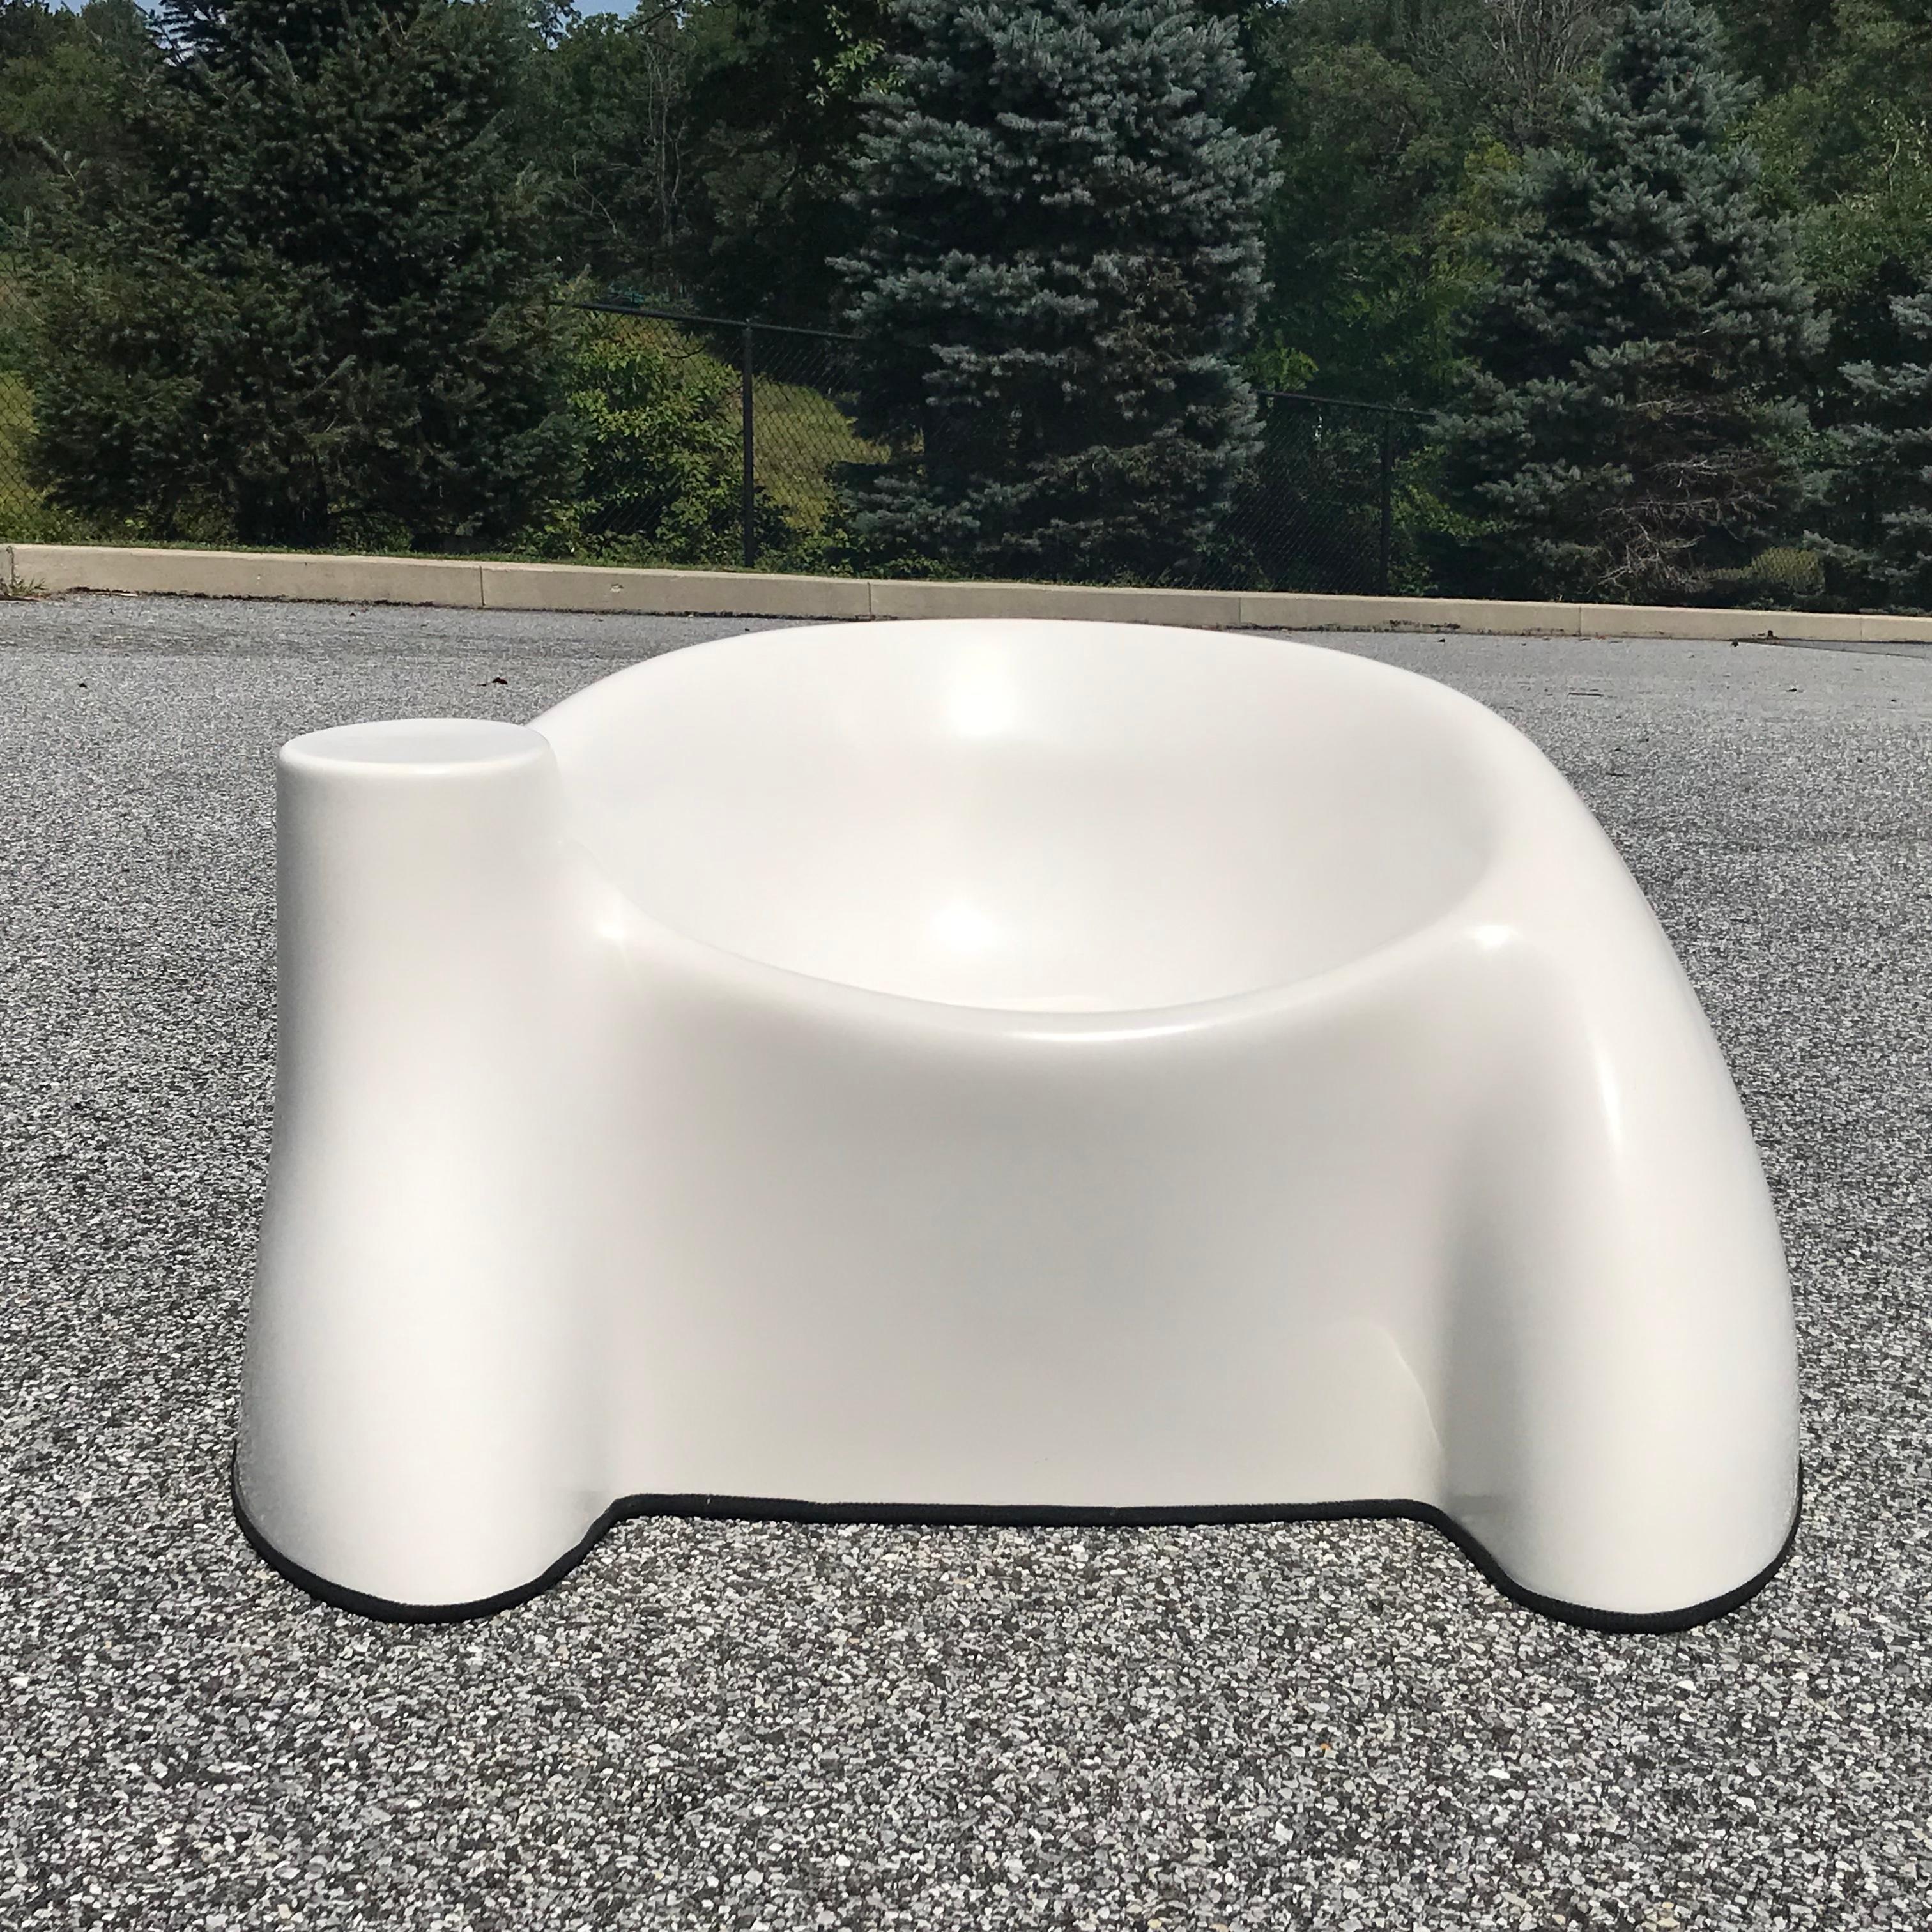 This striking mid century modern Wendell Castle lounge chair was designed and produced circa 1969. Similar to Castle’s Molar chair, the whimsical, organic sculptural form is a signature of his playful design. It is constructed from molded fiberglass